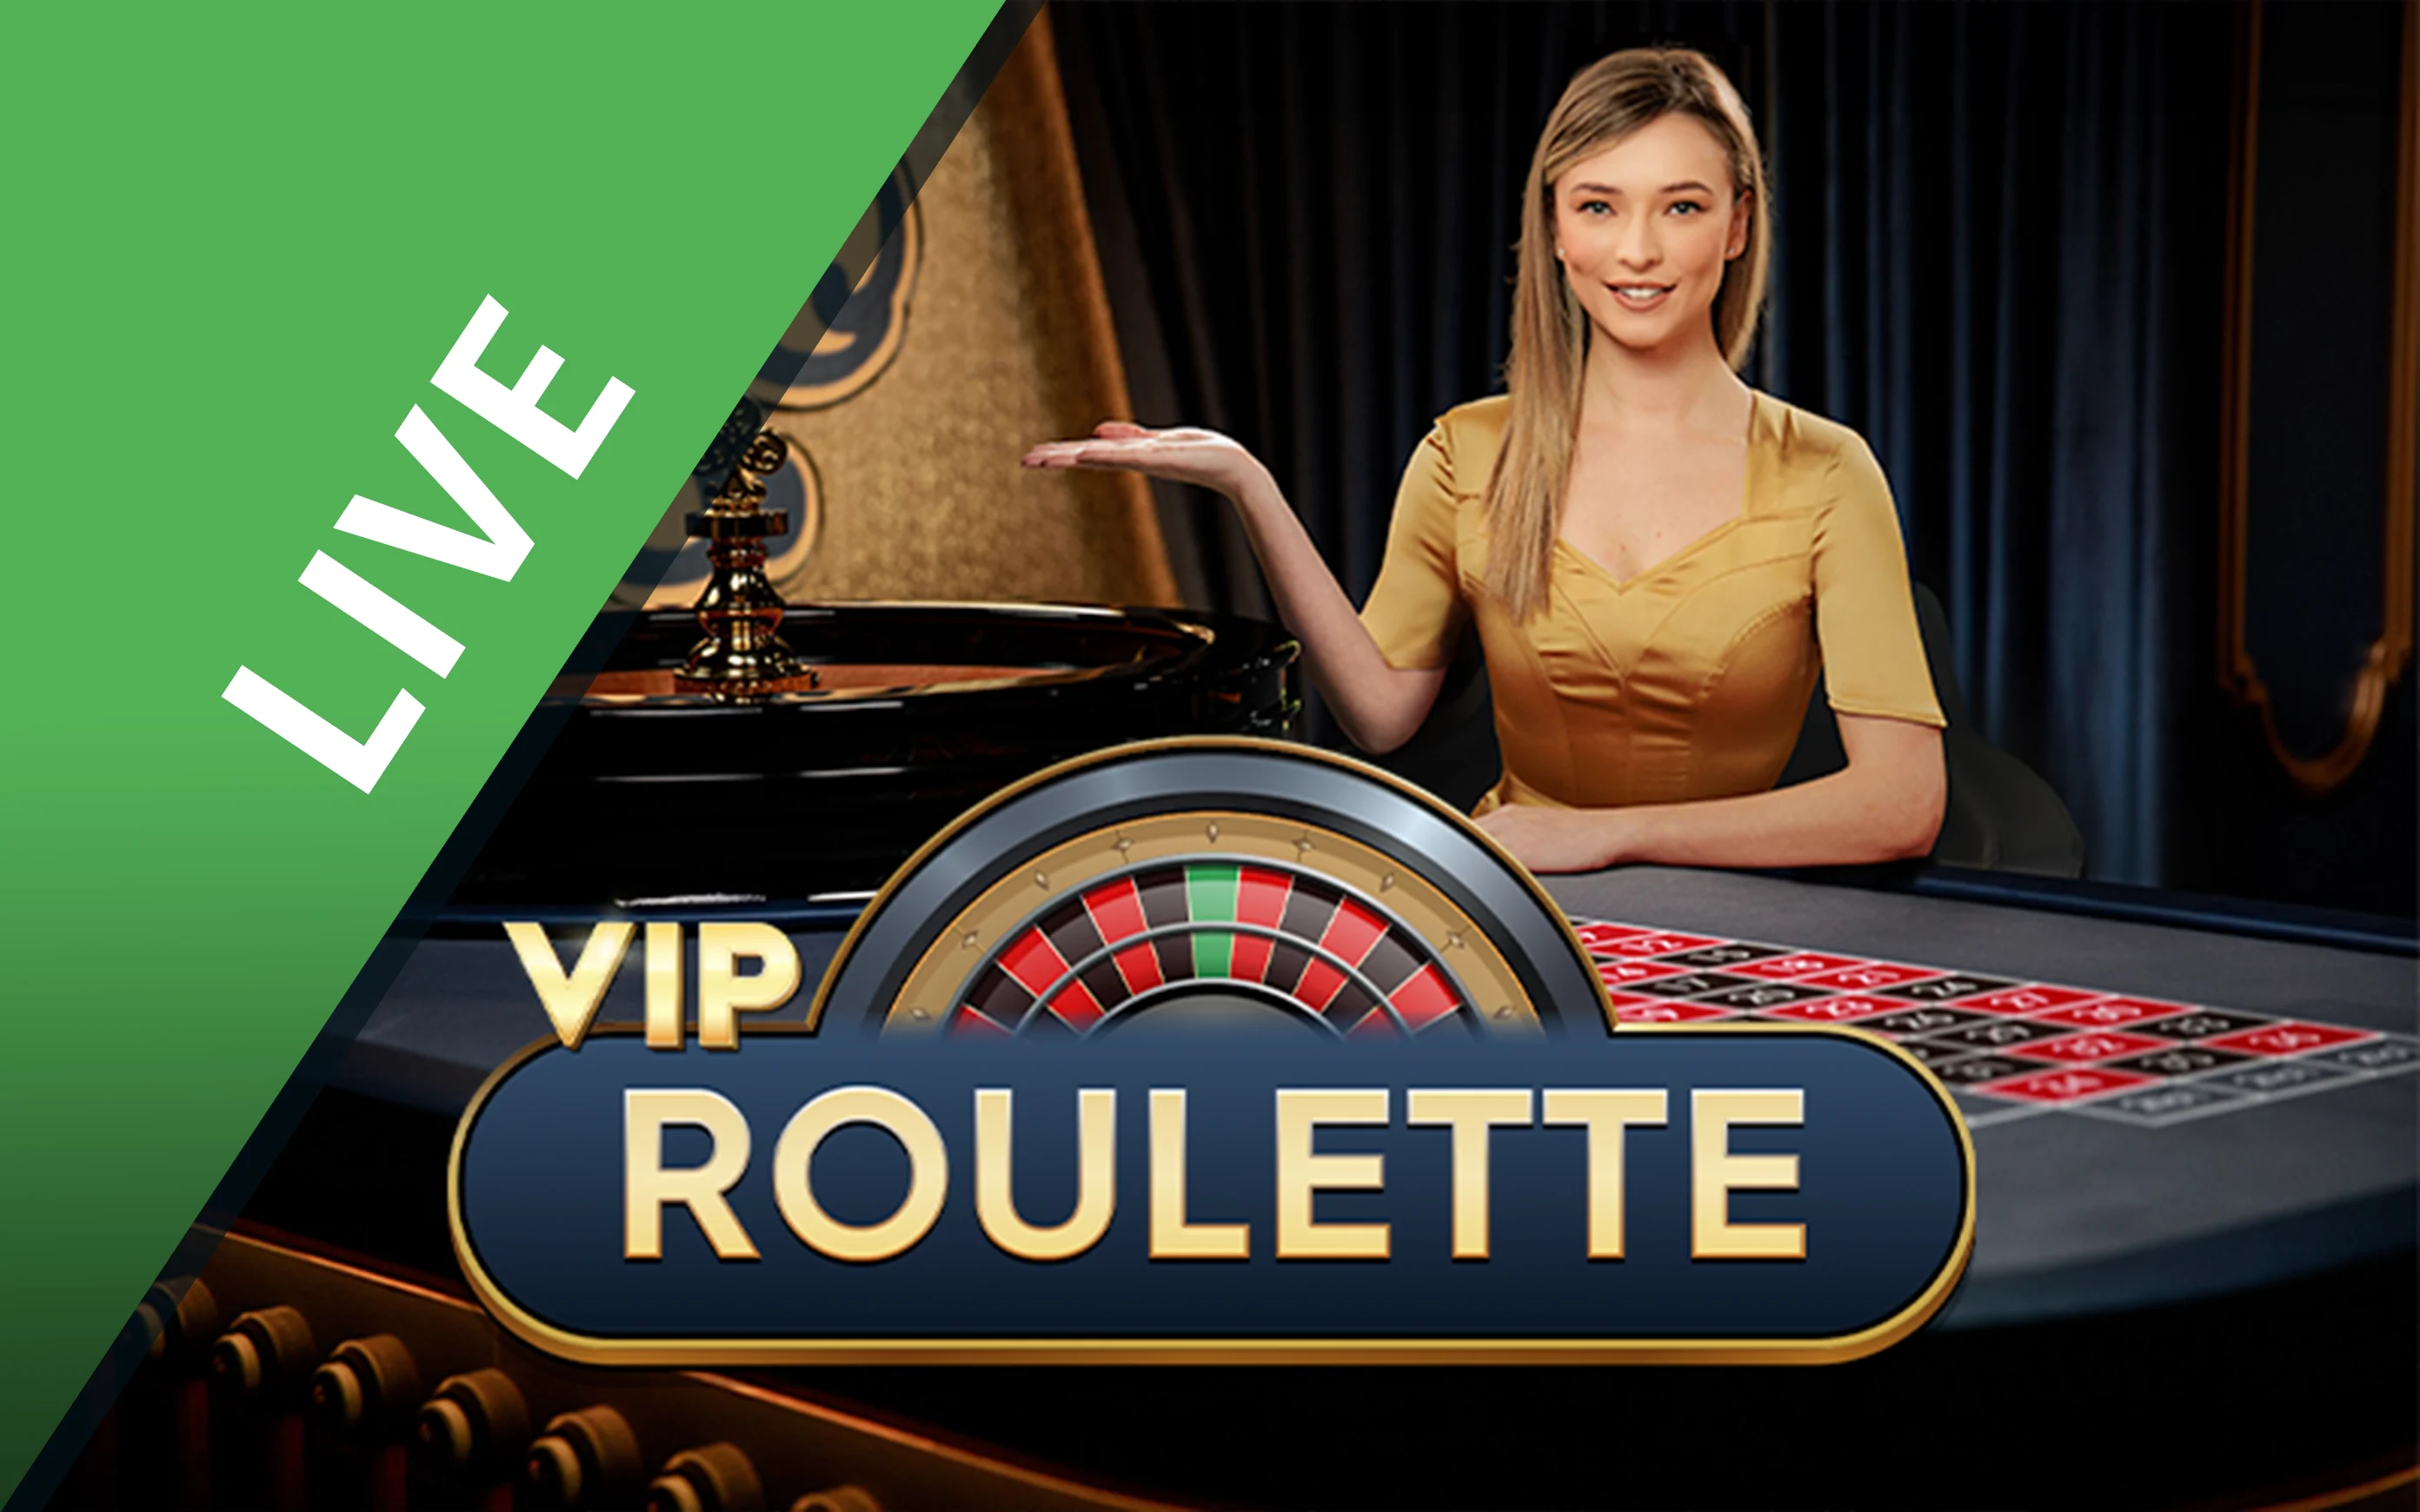 Play VIP Roulette - The Club on Starcasino.be online casino